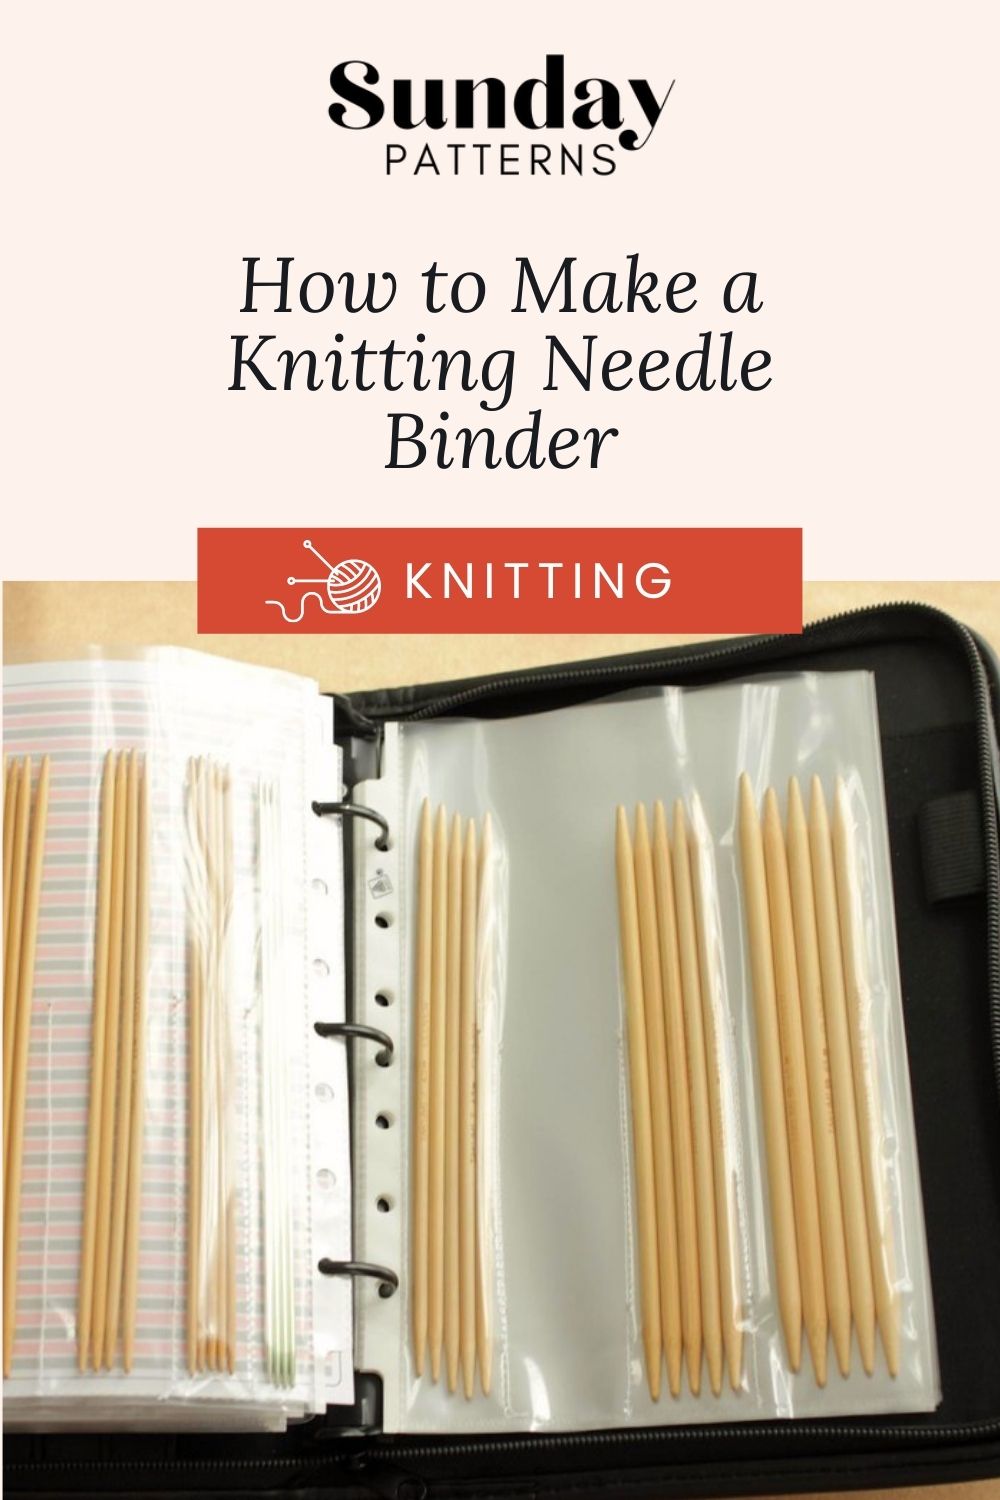 How to make a knitting needle binder